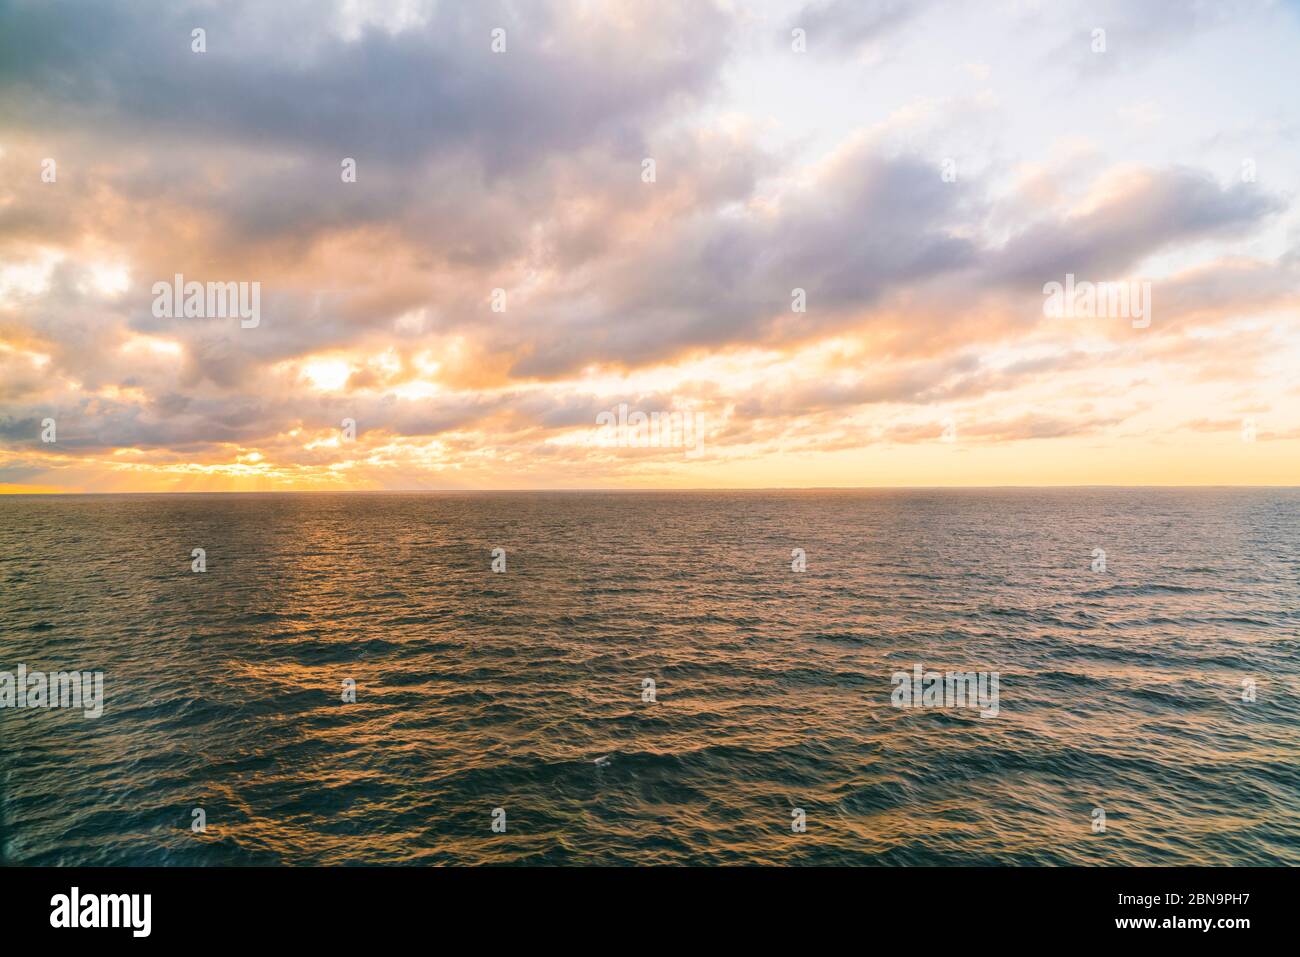 Baltic sea at the bay of finland with sun setting on the horizon Stock Photo